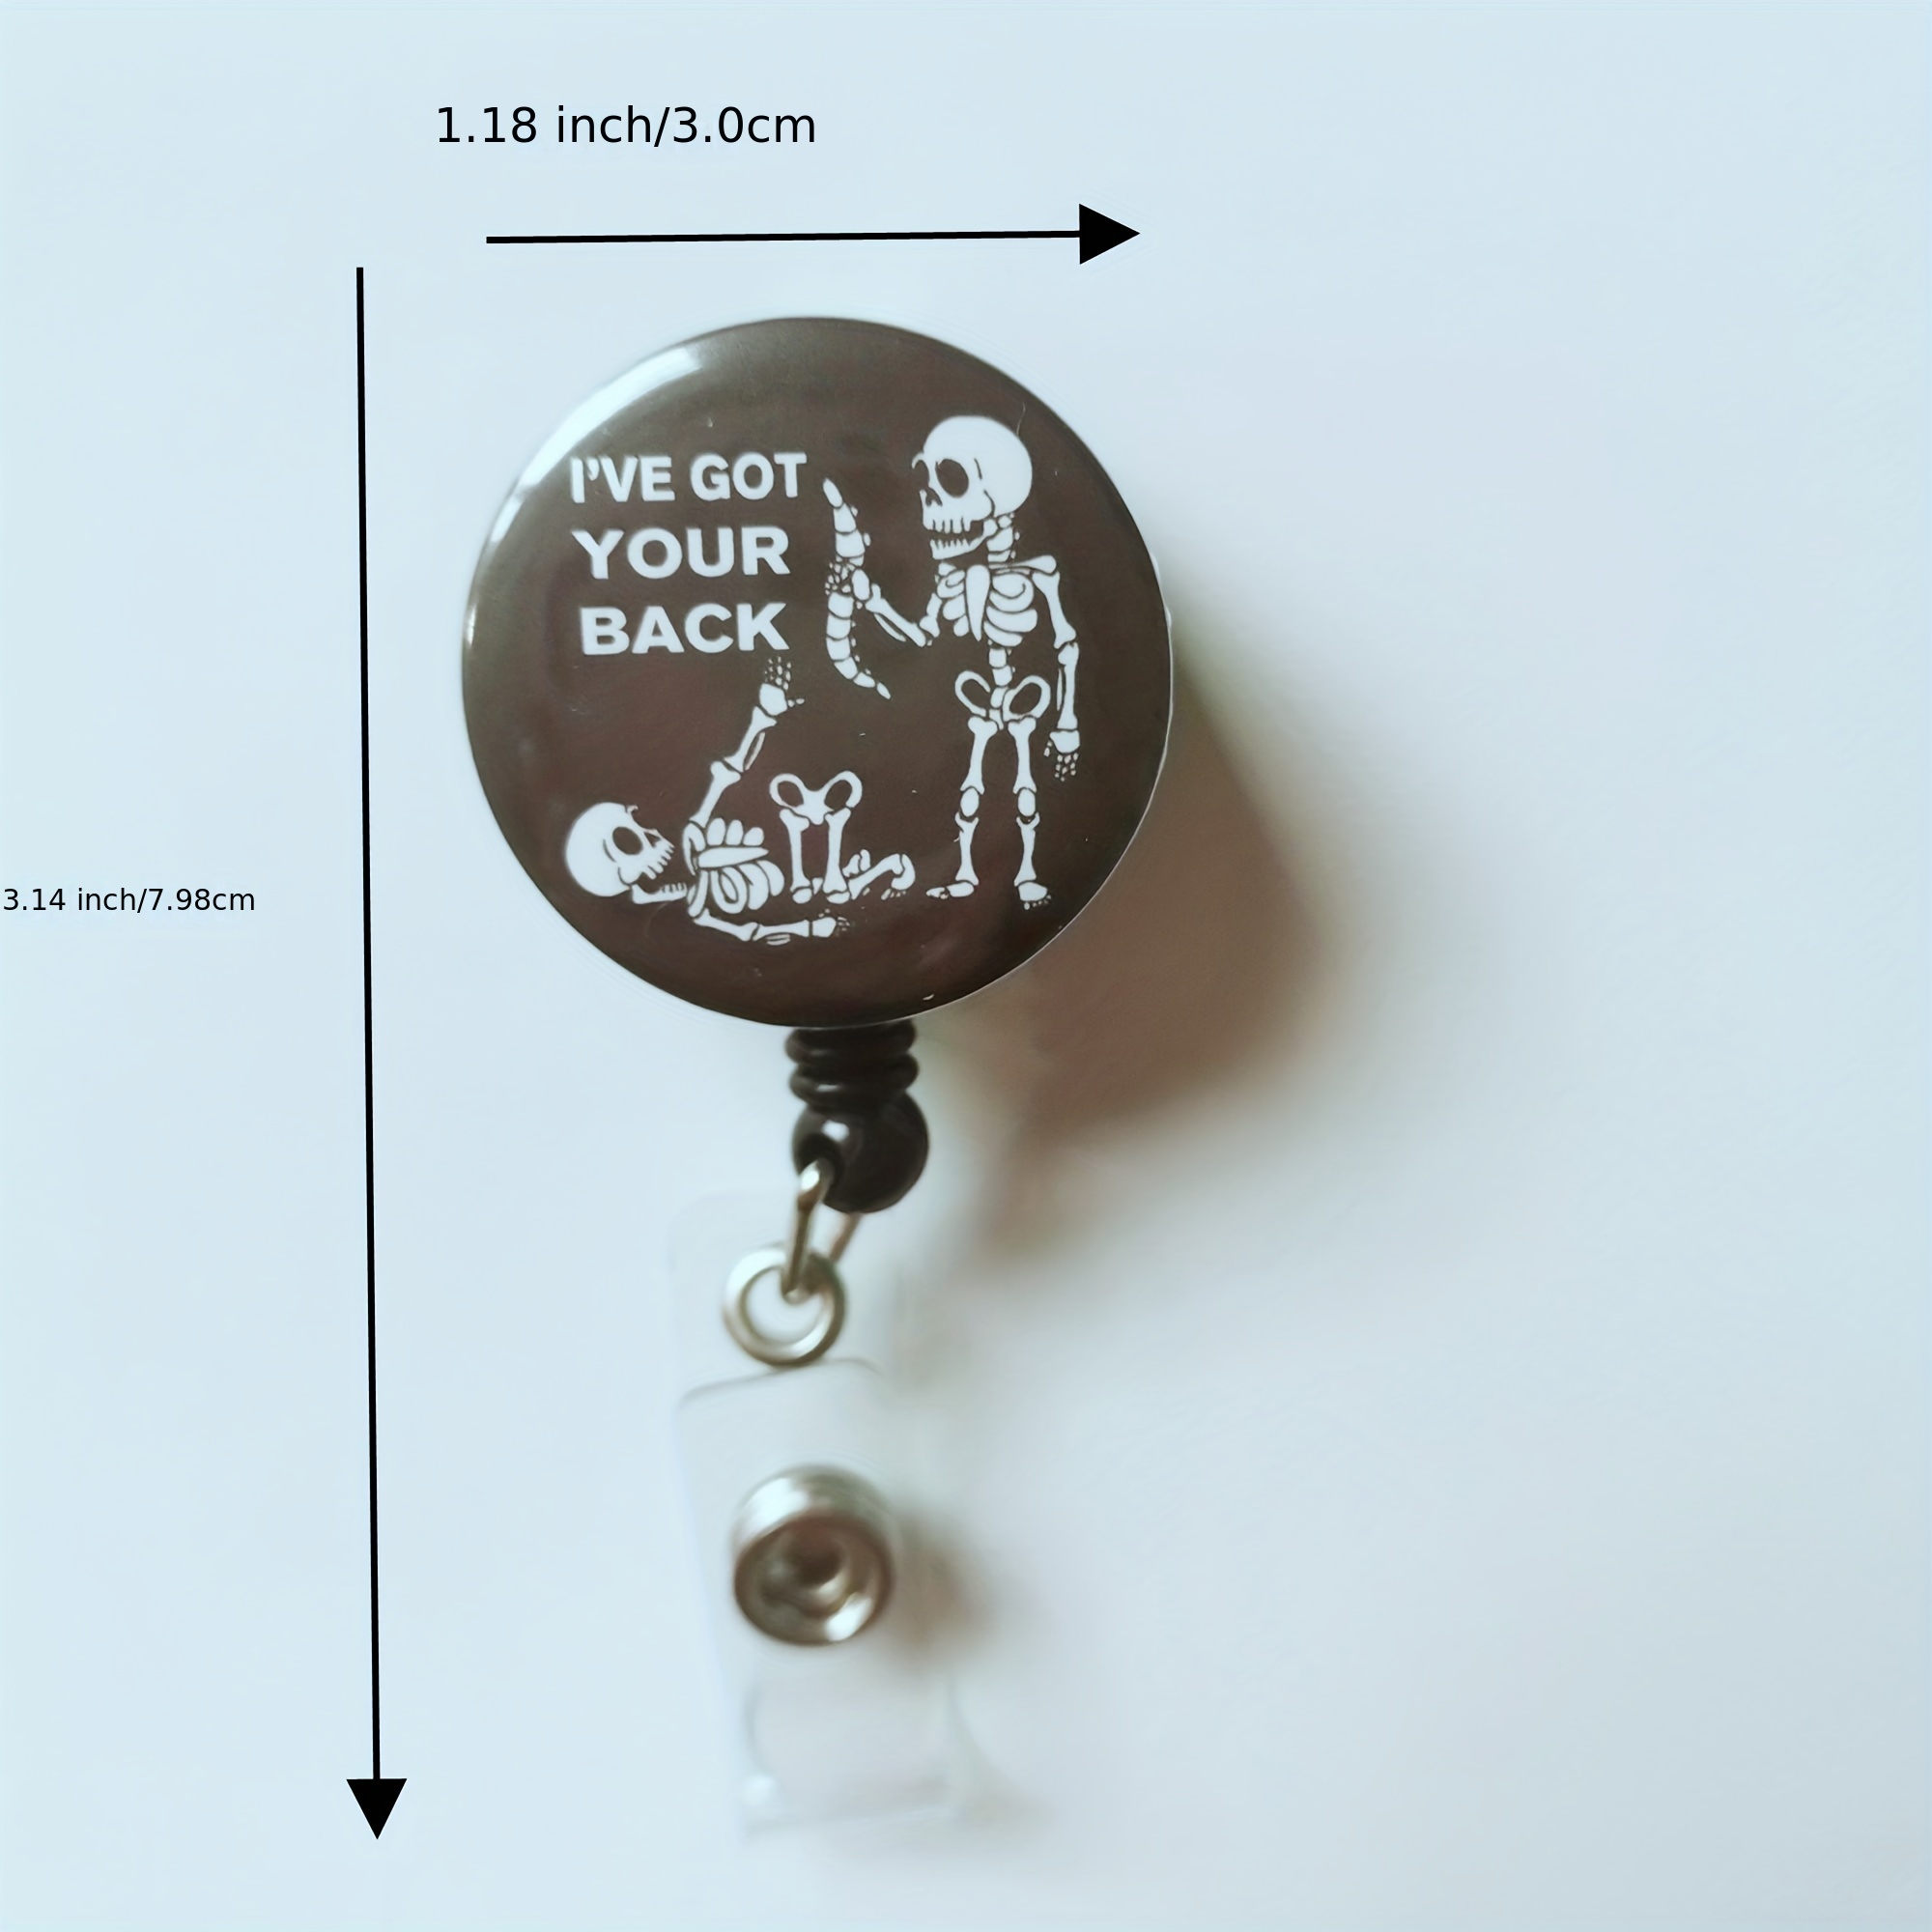 I've Got Your Back Badge Reels Holder Retractable Spine Chiropractor Orthopedics ID Clip for Nurse Name Tag Card Cute Funny Fun Cool Nursing